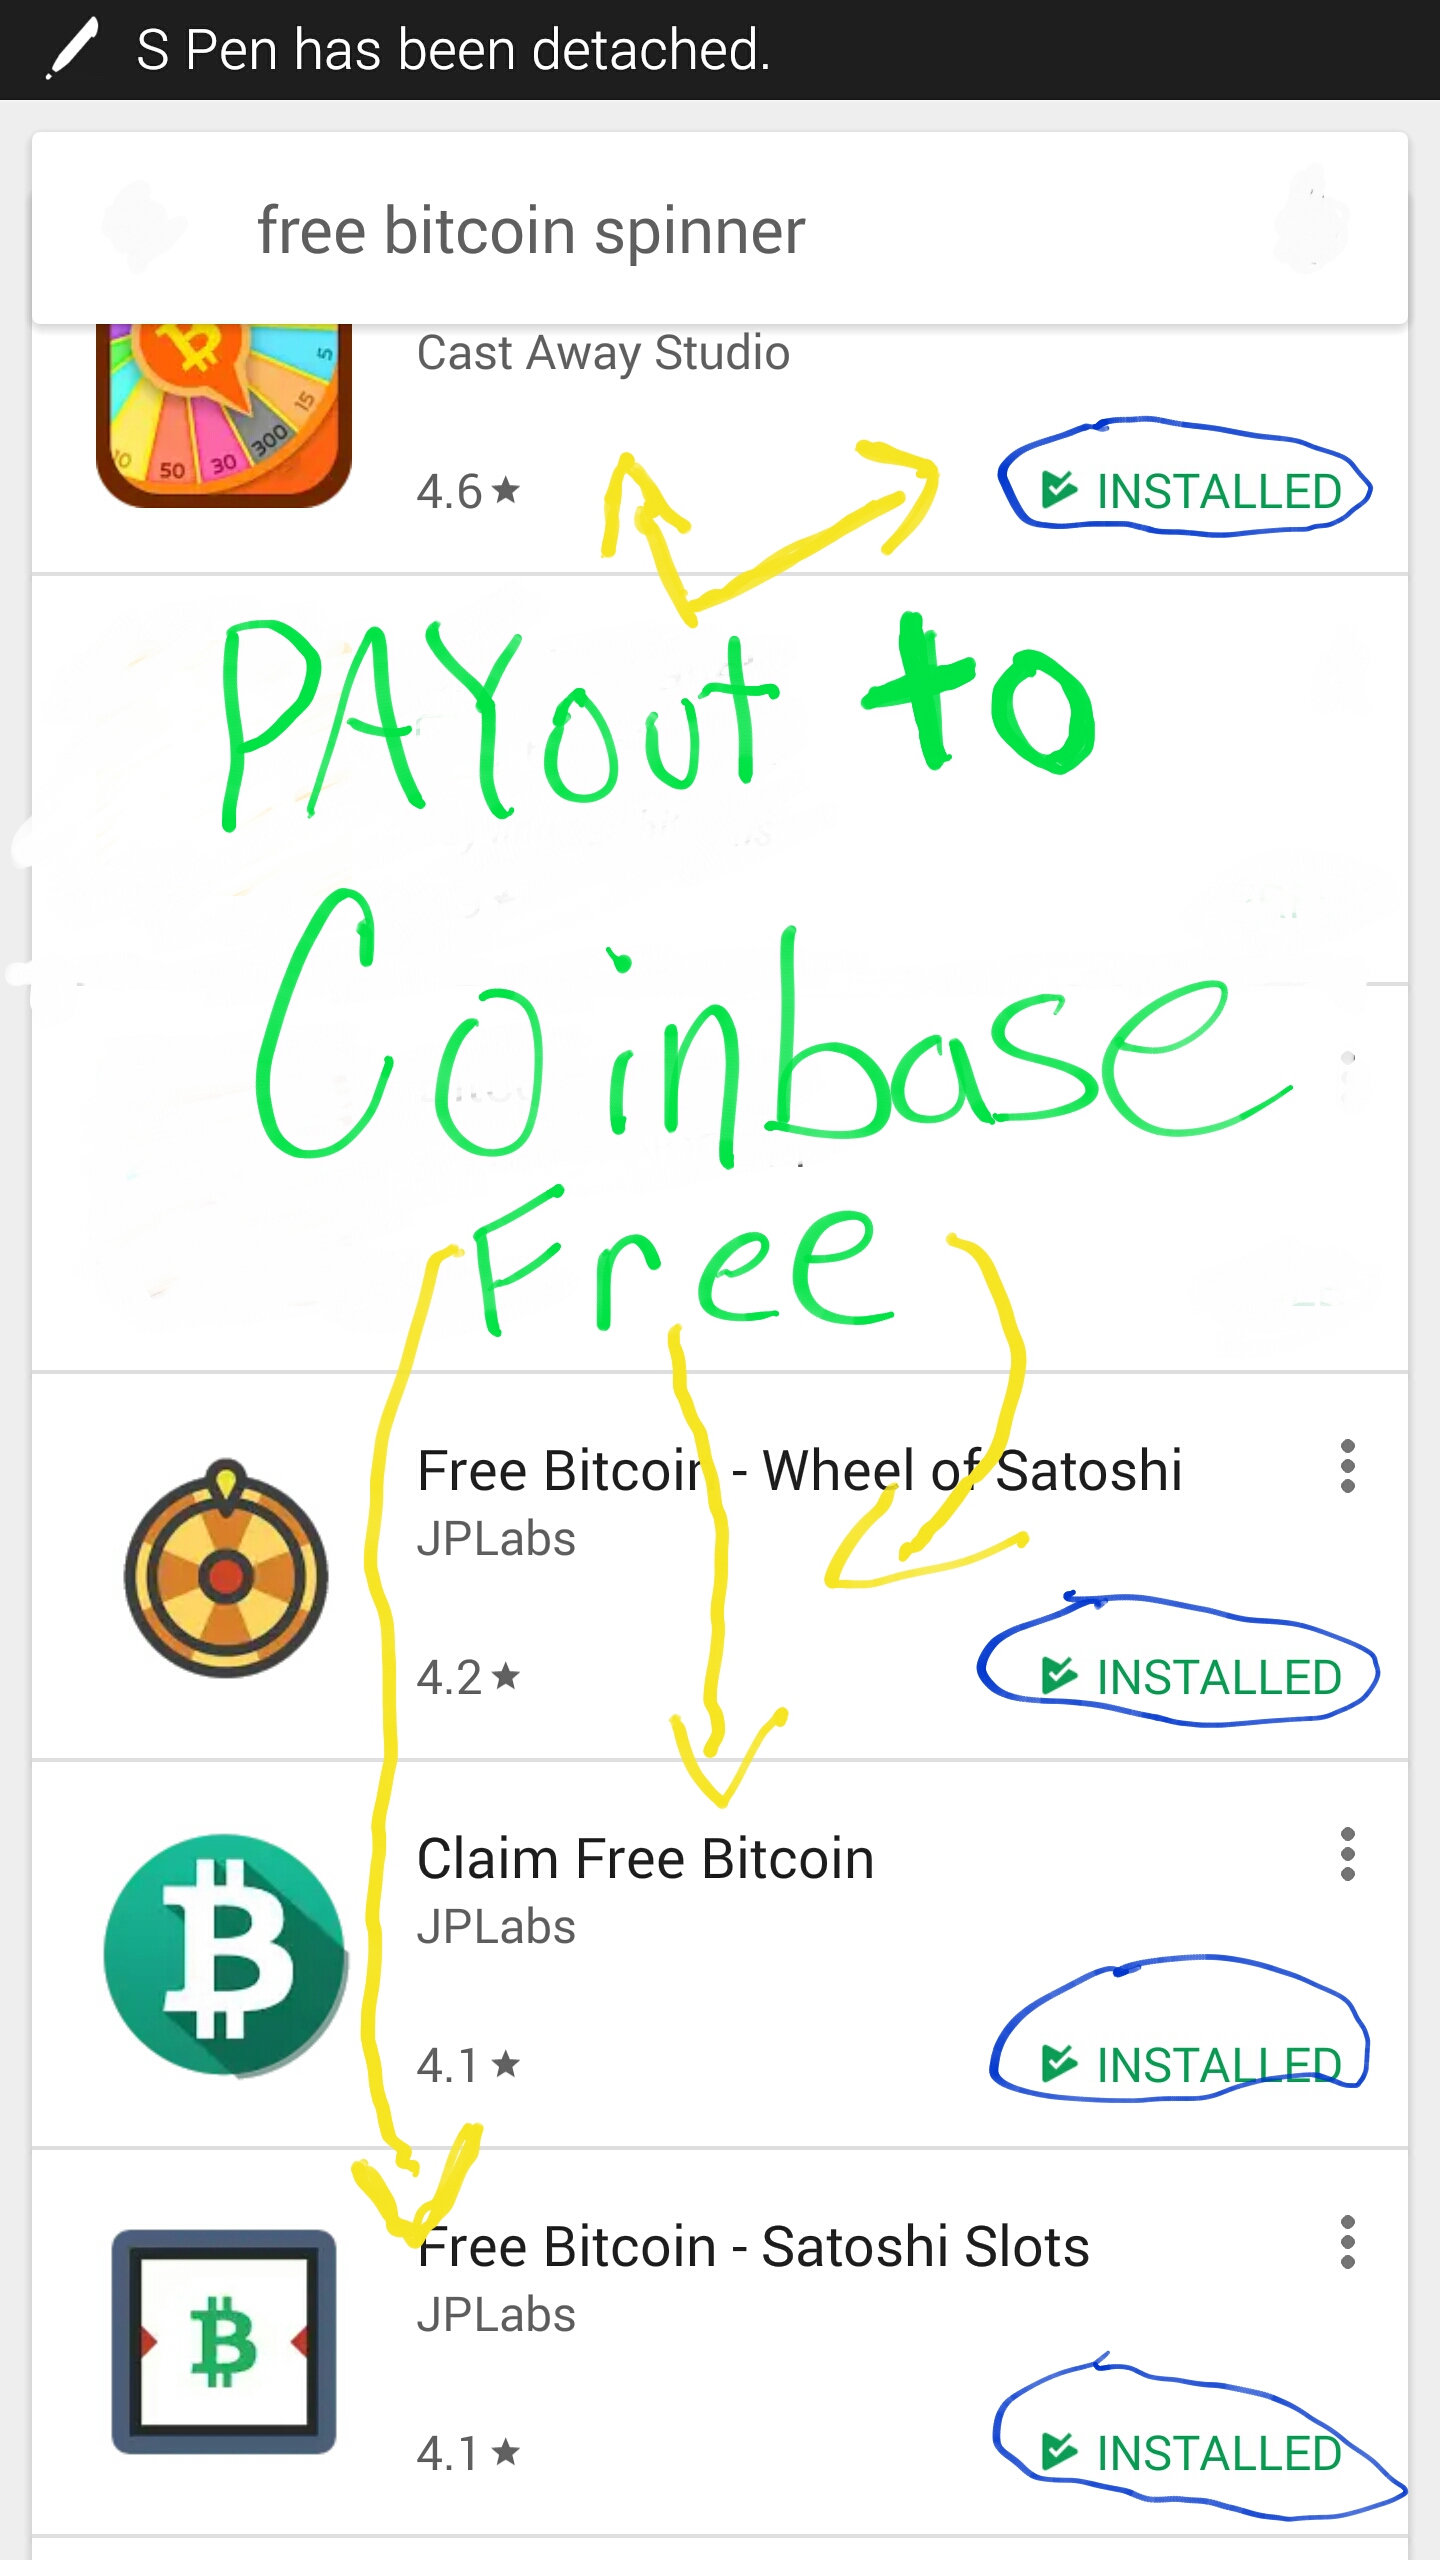 Free Bitcoin Straight To Your Coinbase Wallet Four Free Apps Ste!   emit - 